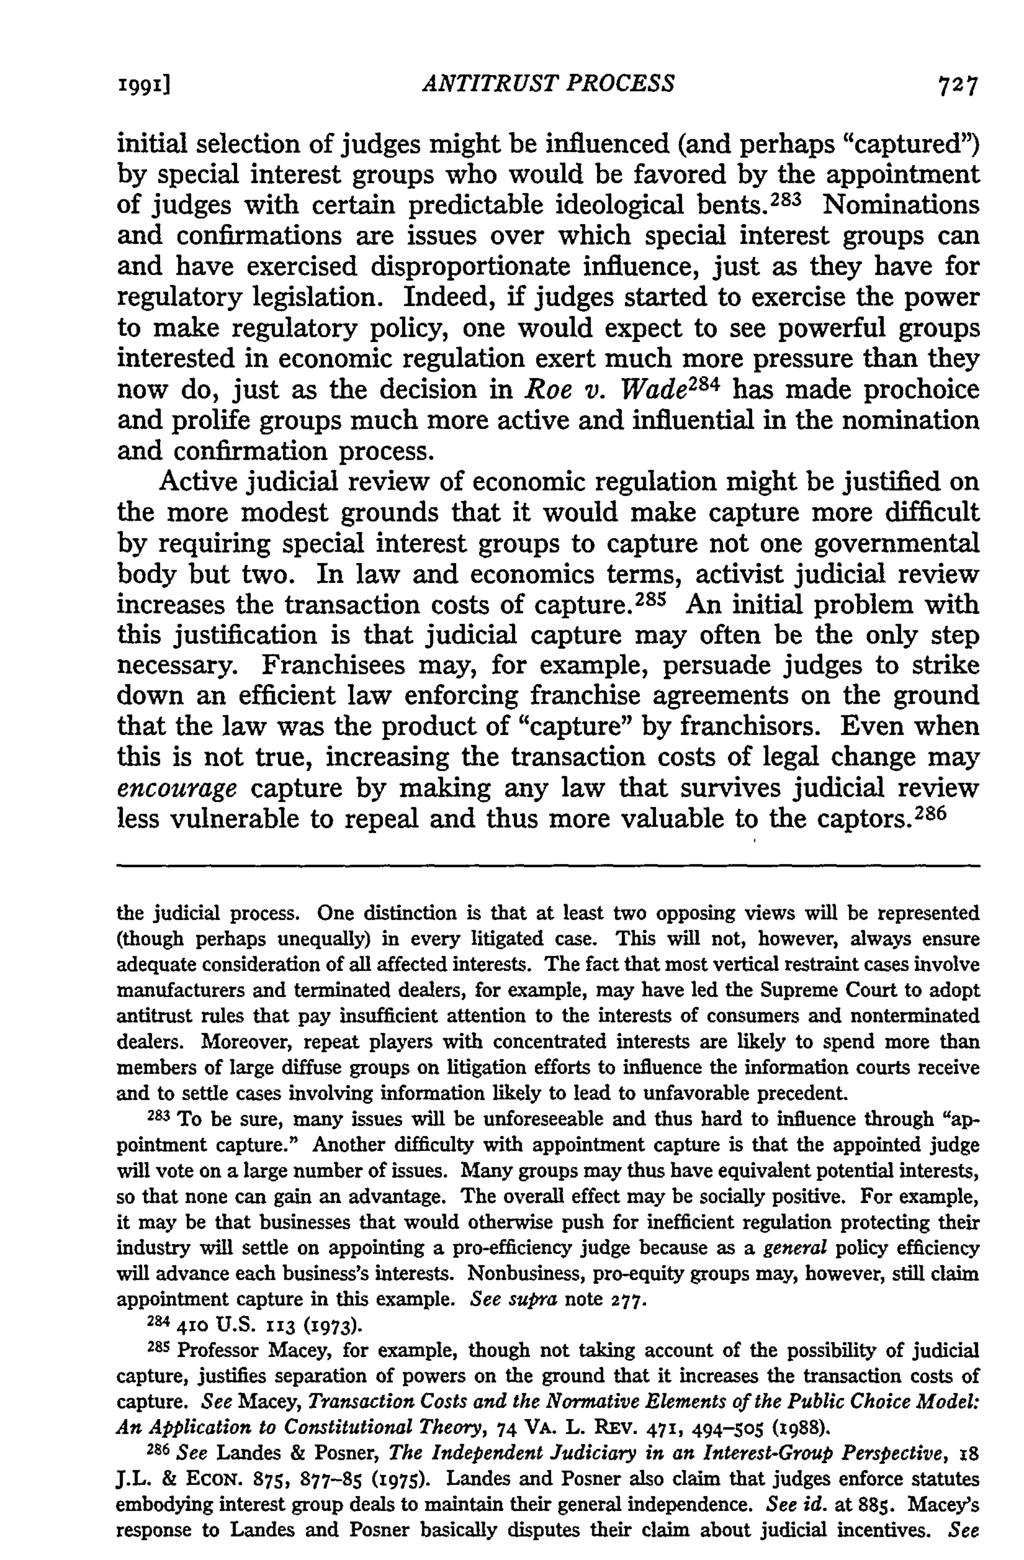 1991] ANTITRUST PROCESS initial selection of judges might be influenced (and perhaps "captured") by special interest groups who would be favored by the appointment of judges with certain predictable